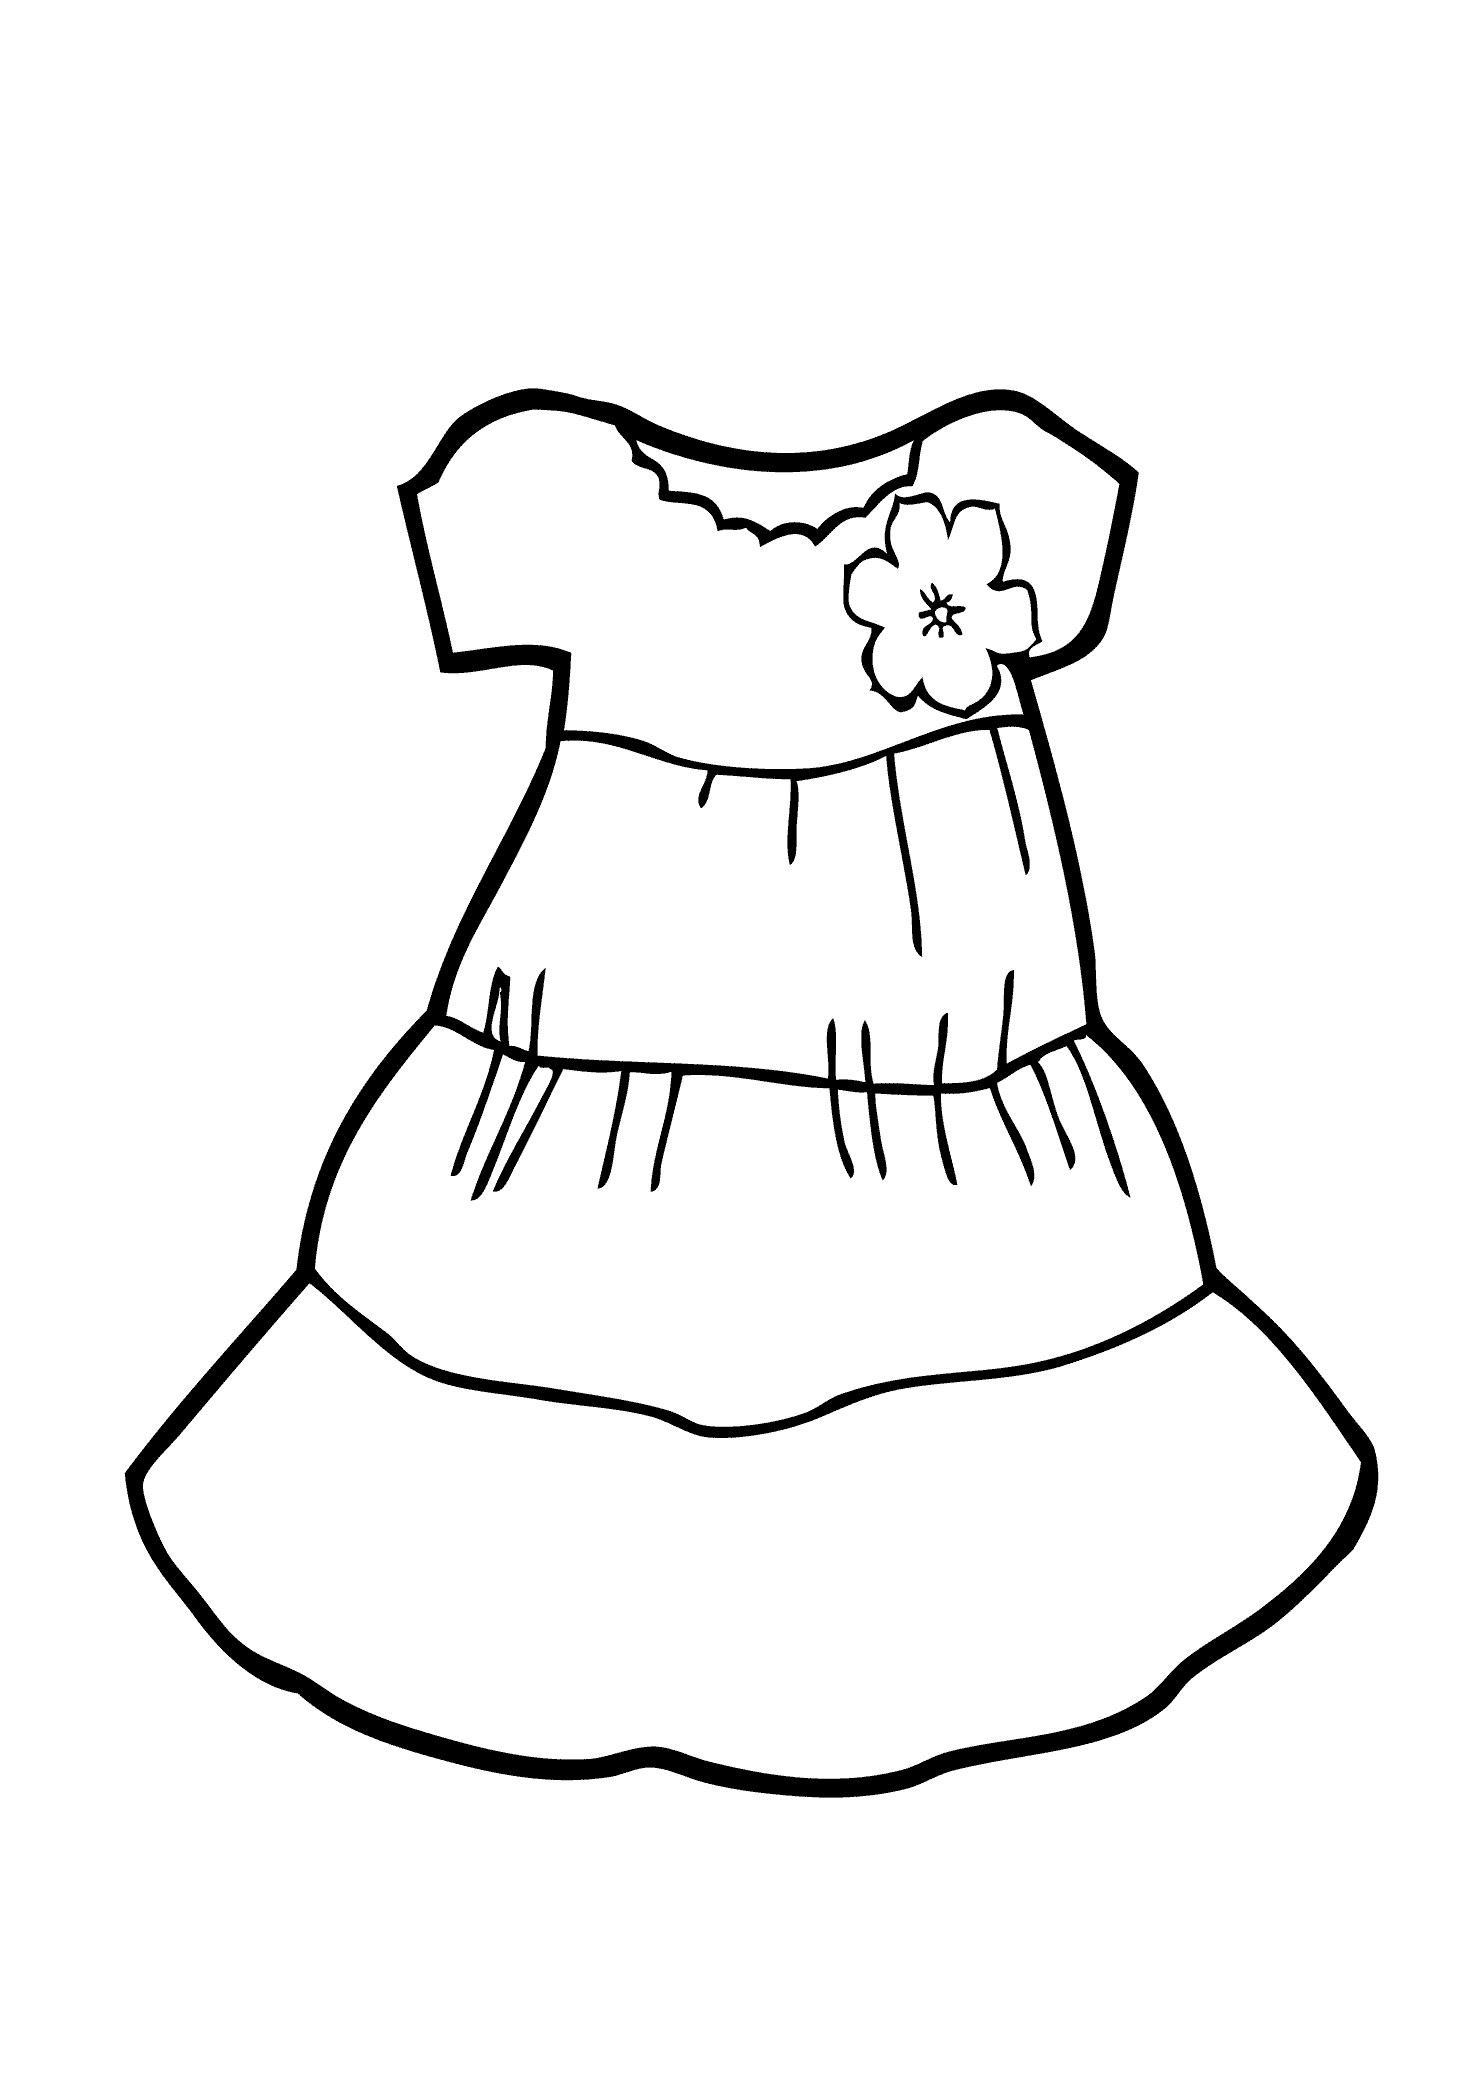 Coloring Pages : Coloring Girls Dress Free Sheets For Of Summer ...